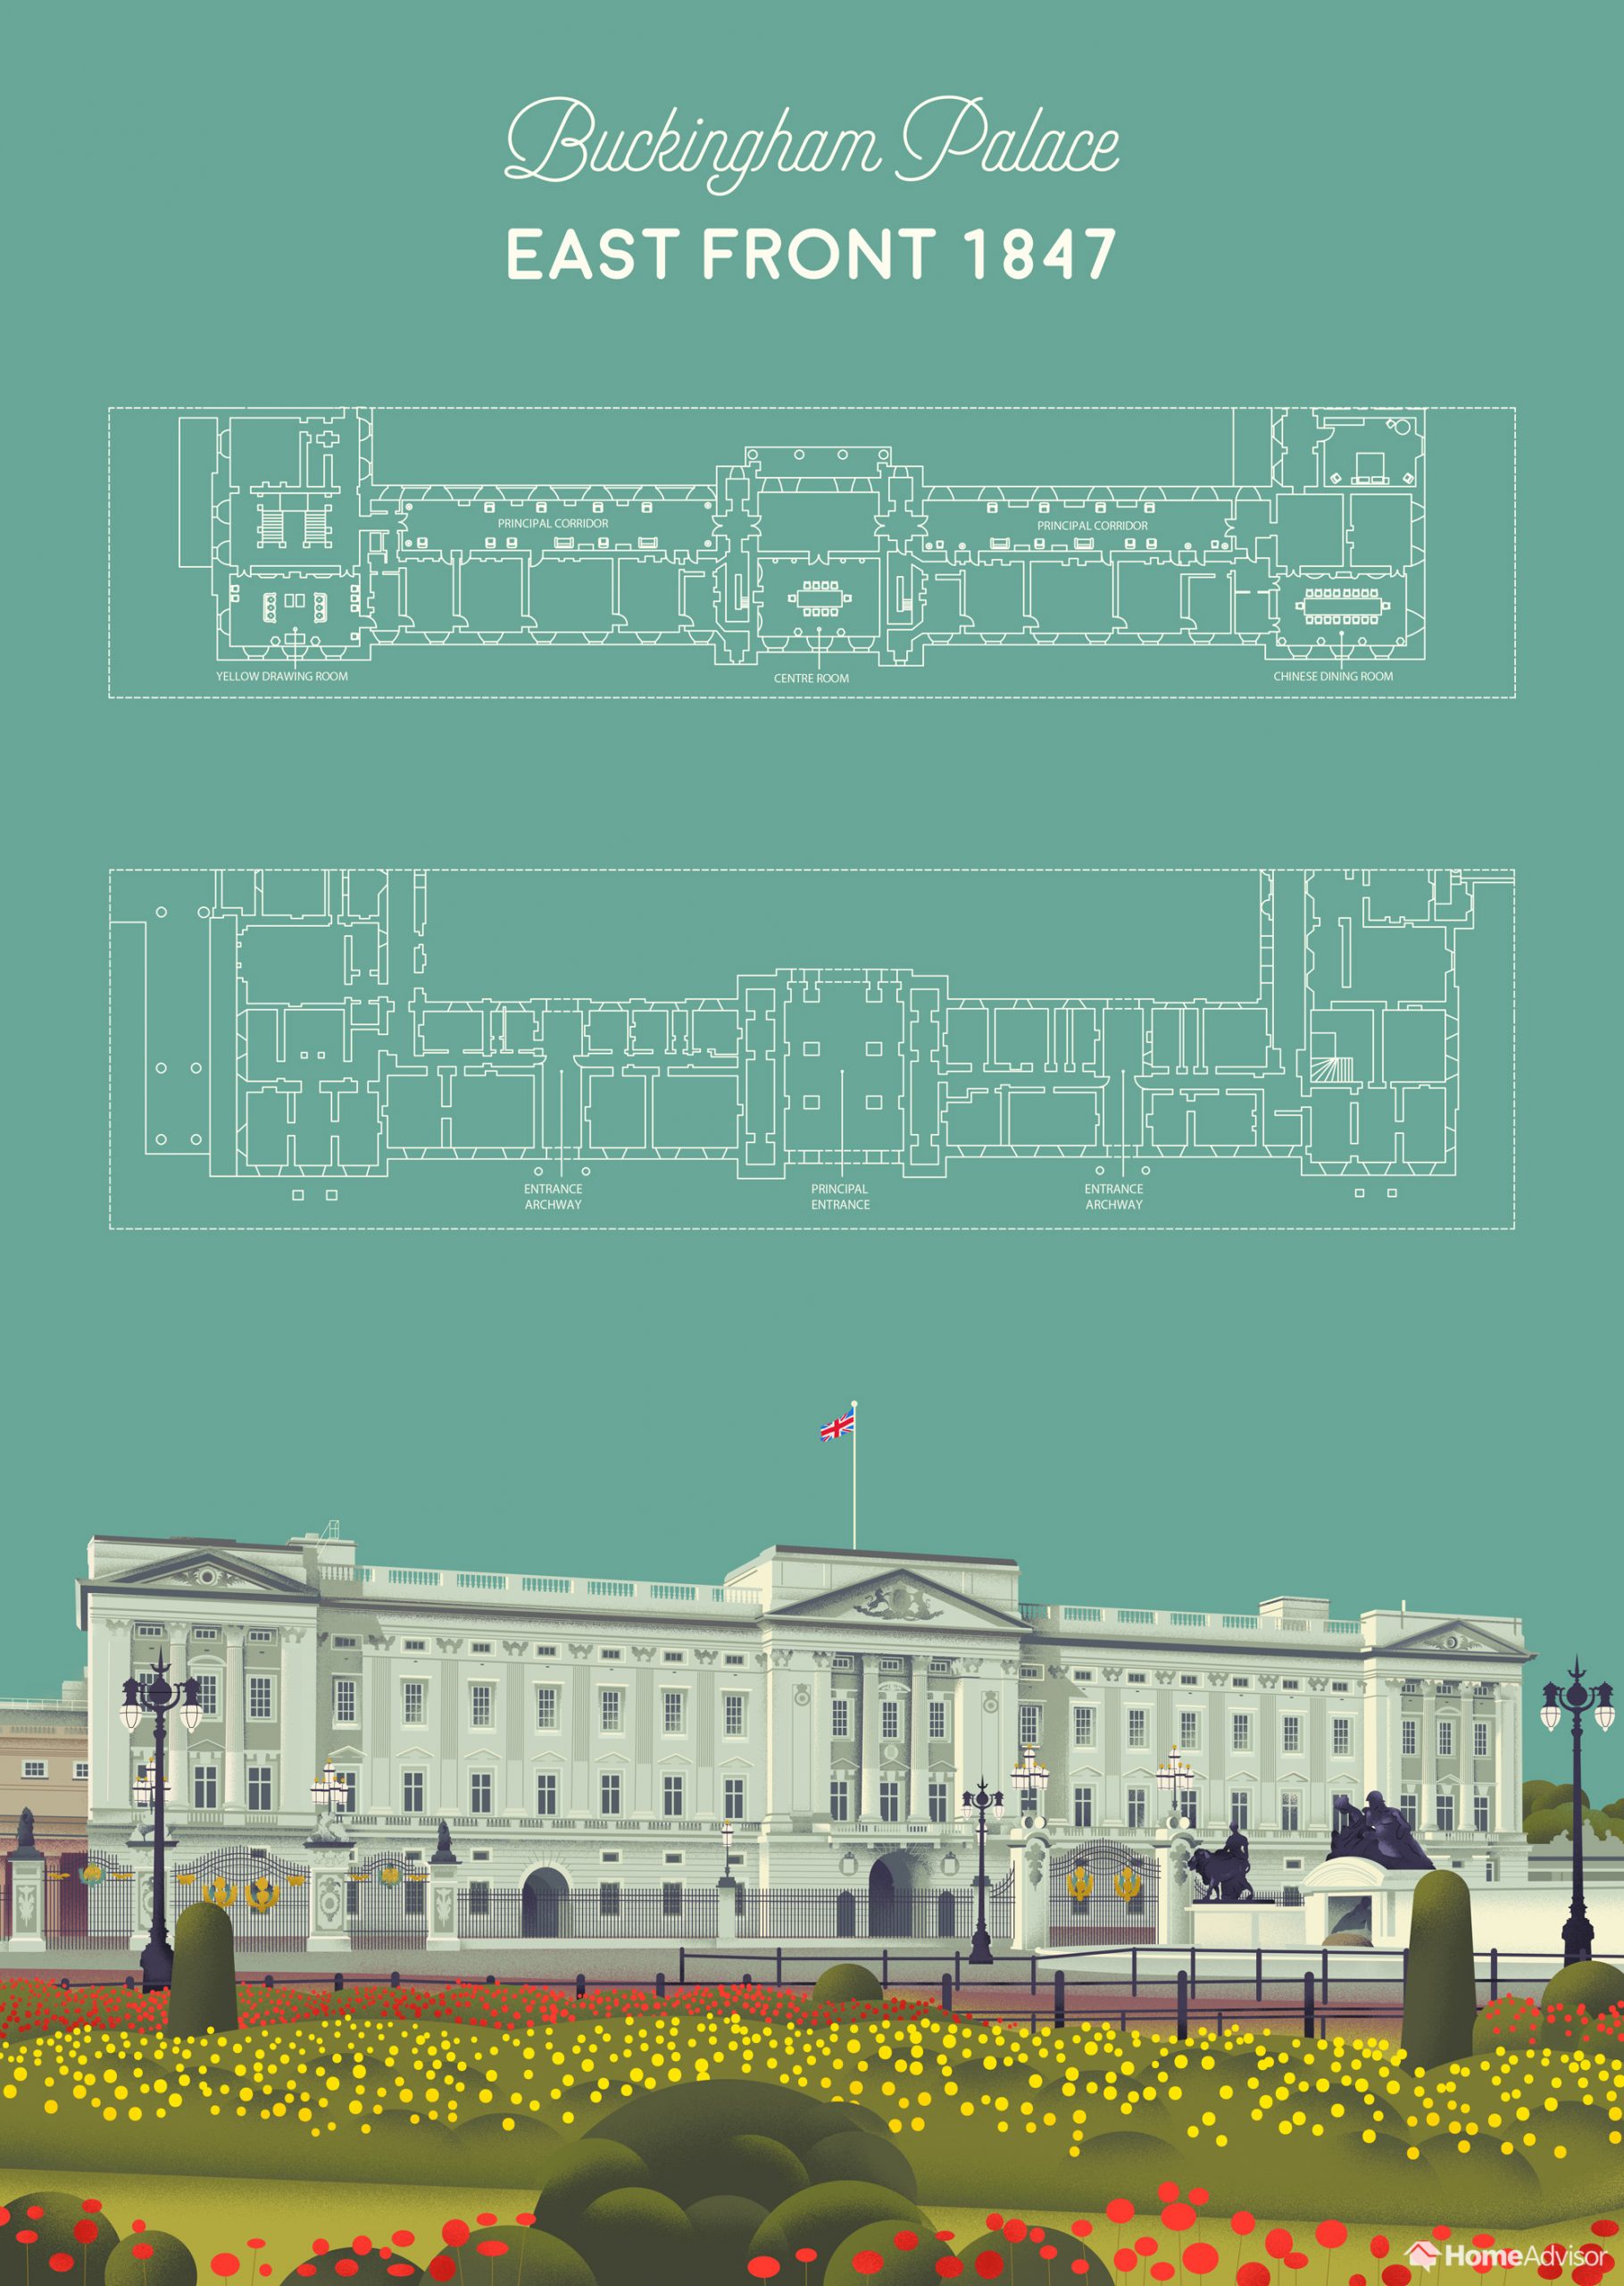 REVEALED: Buckingham Palace’s unseen floor plans – Royal Central